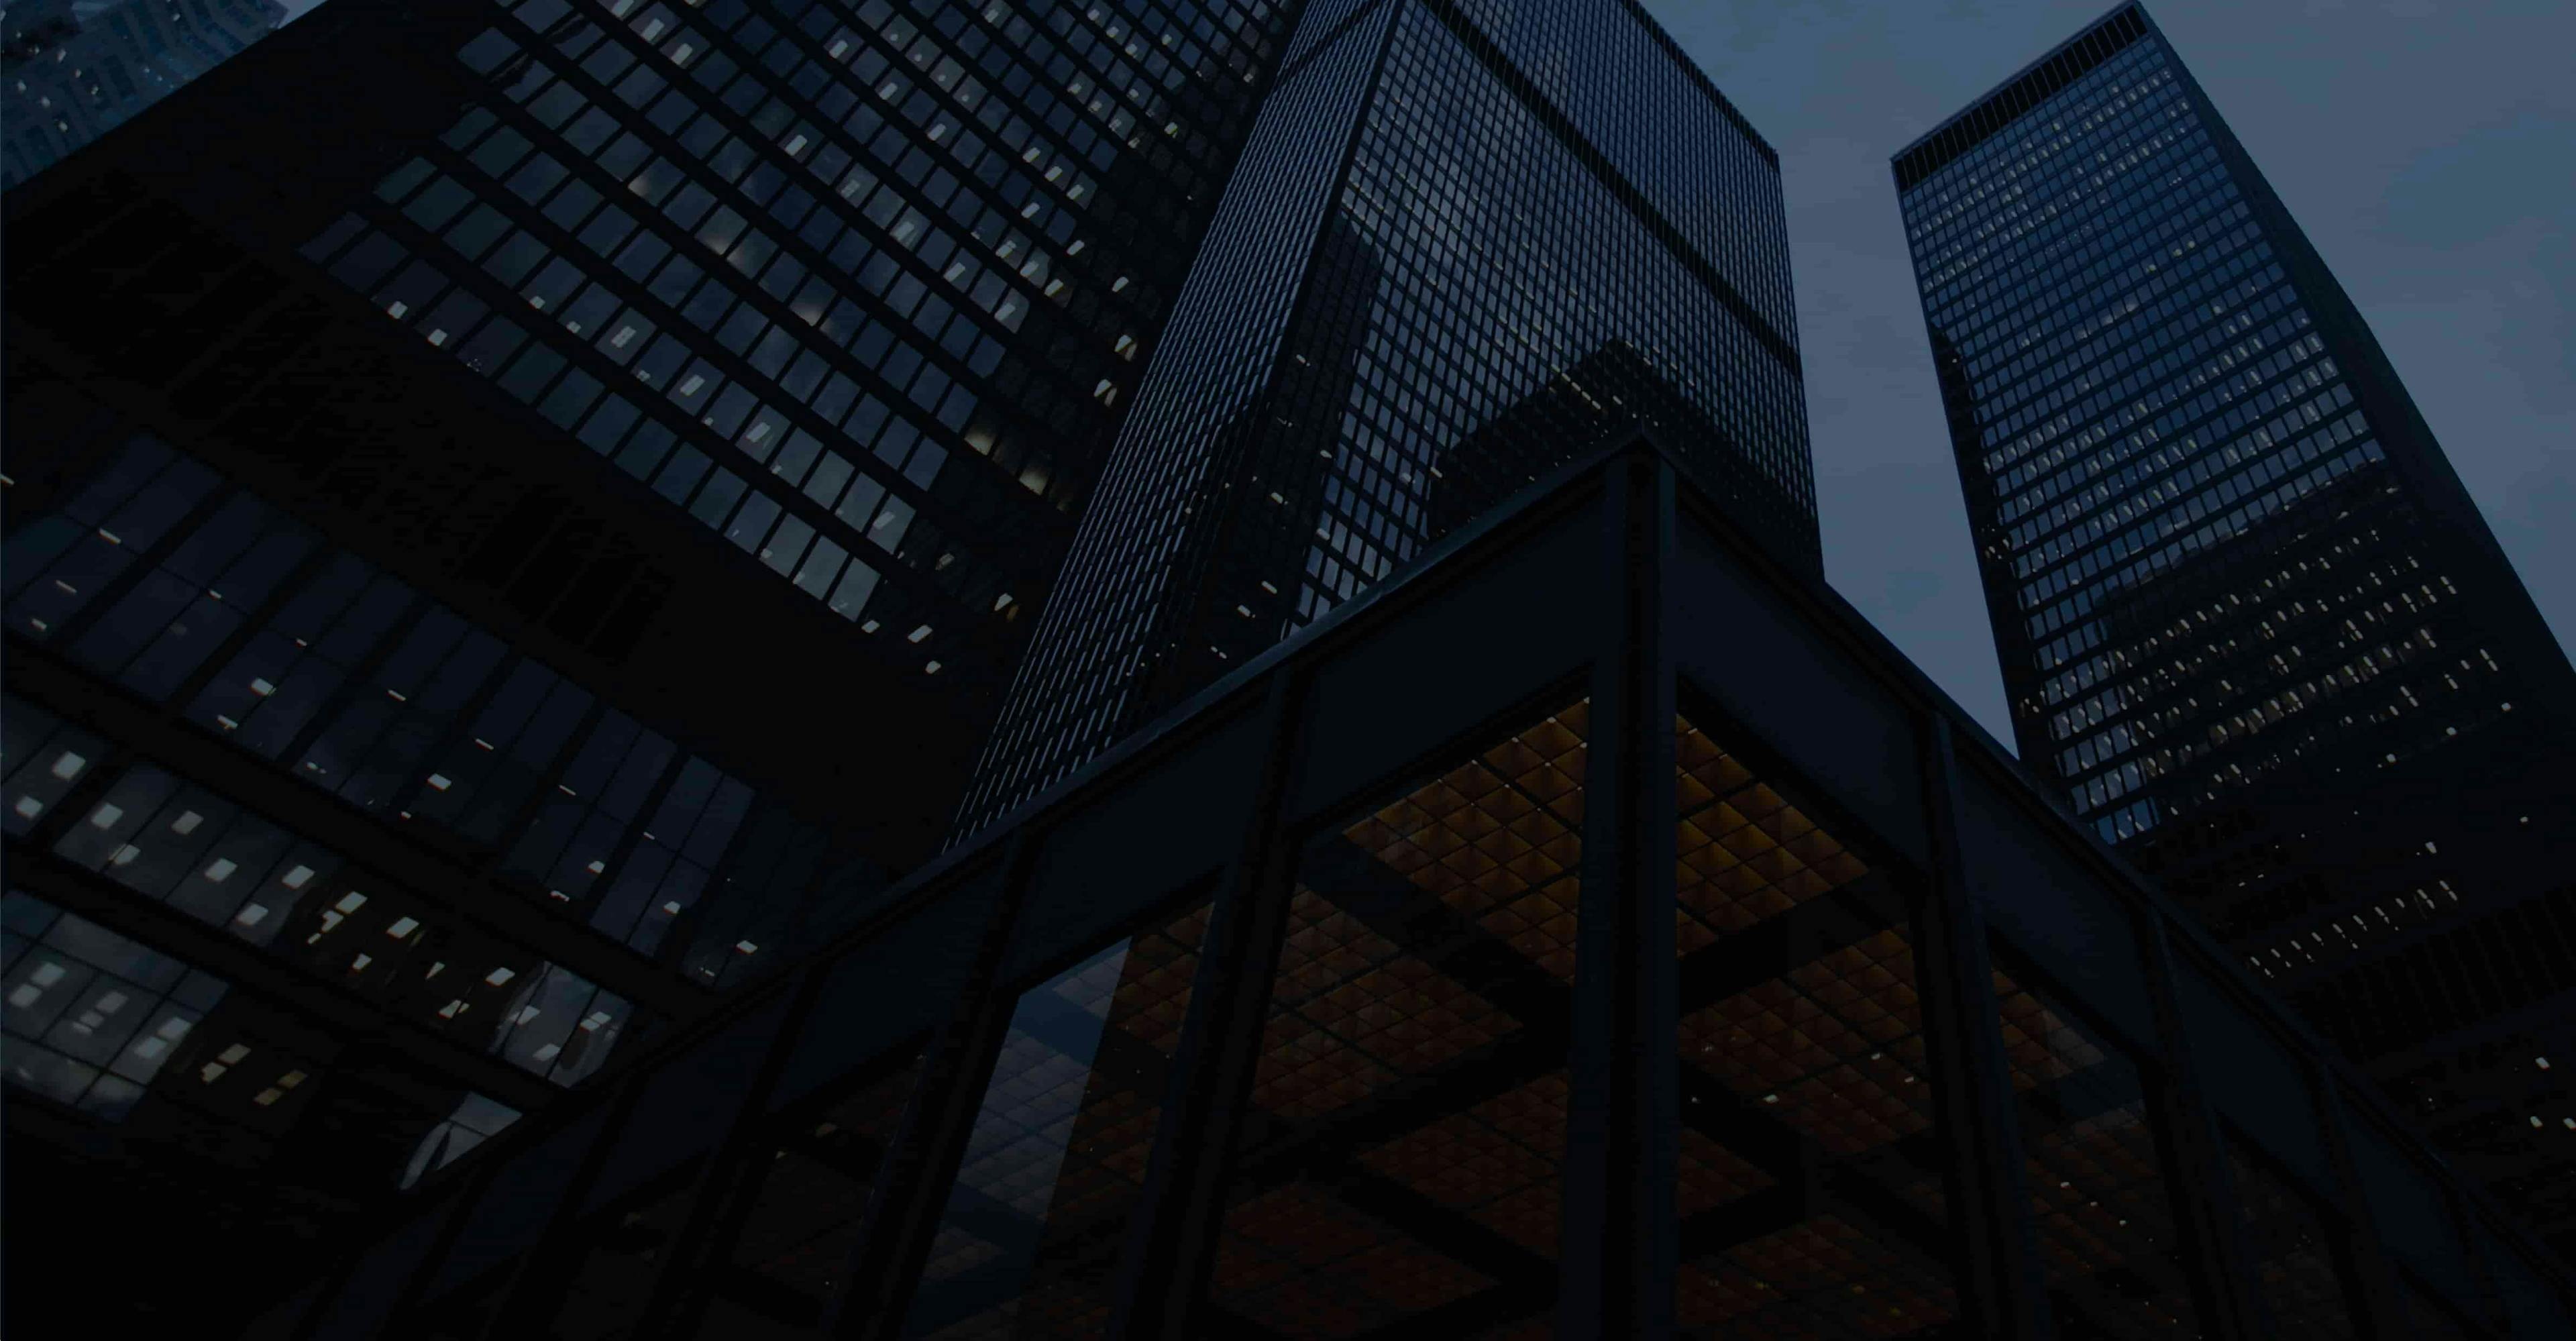 A background image looking up at skyscrapers